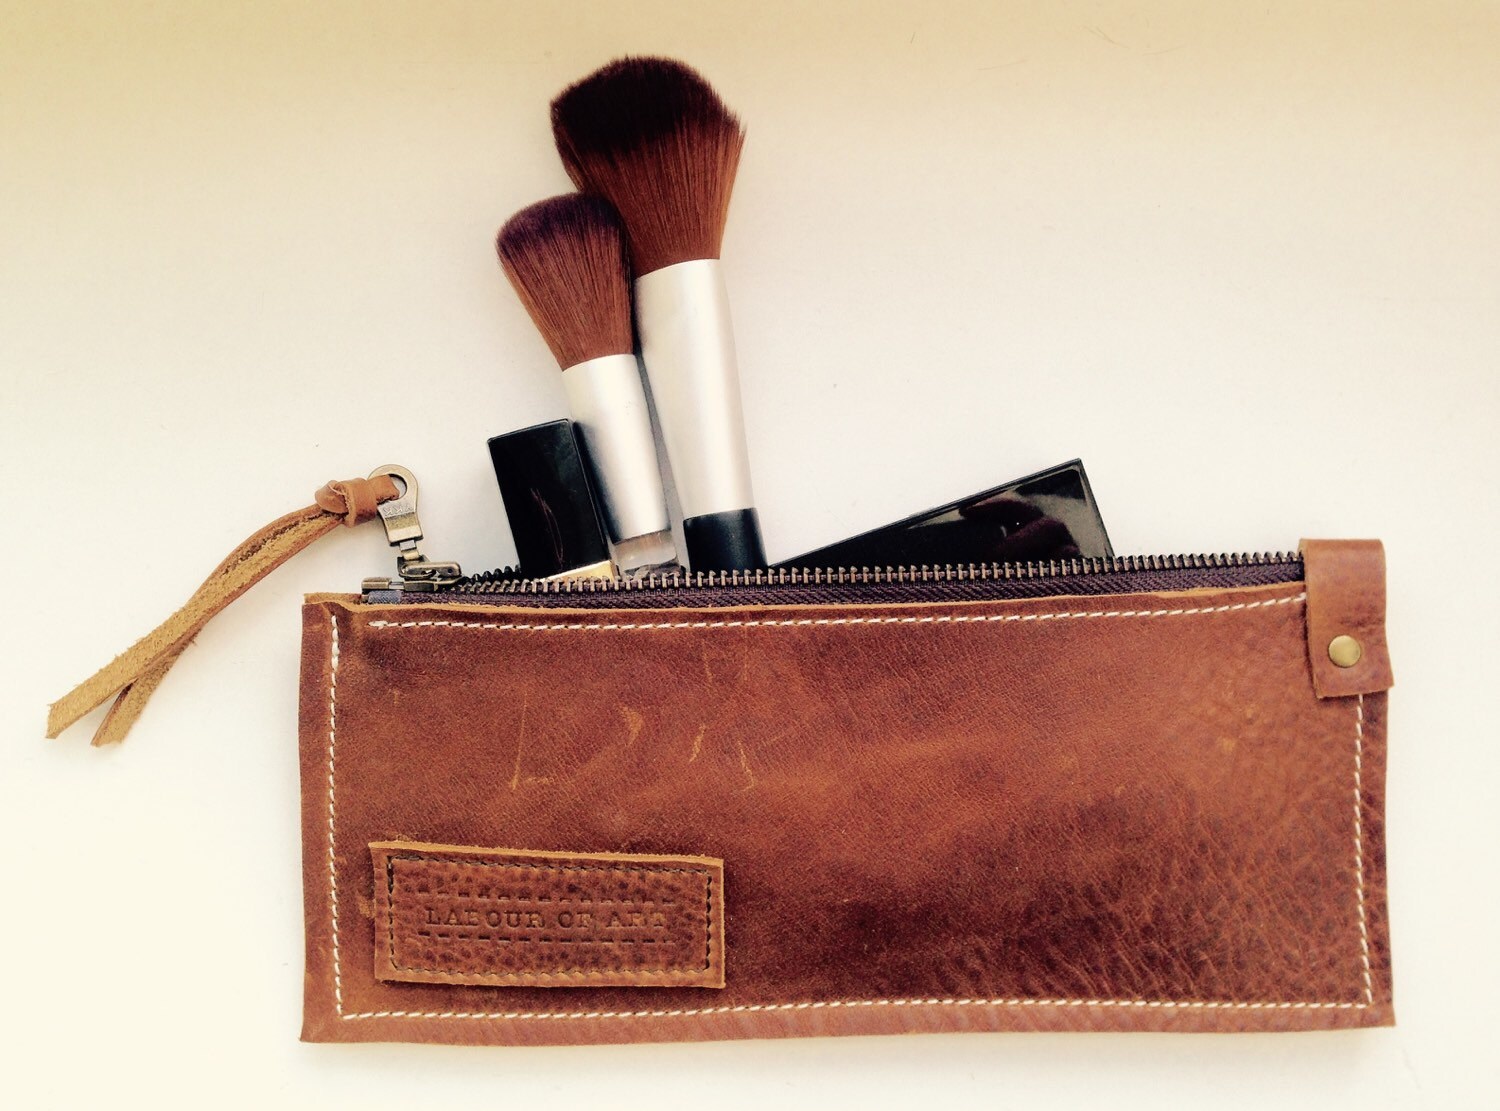 Leather Pencil Case Dark Brown by LABOURofART on Etsy